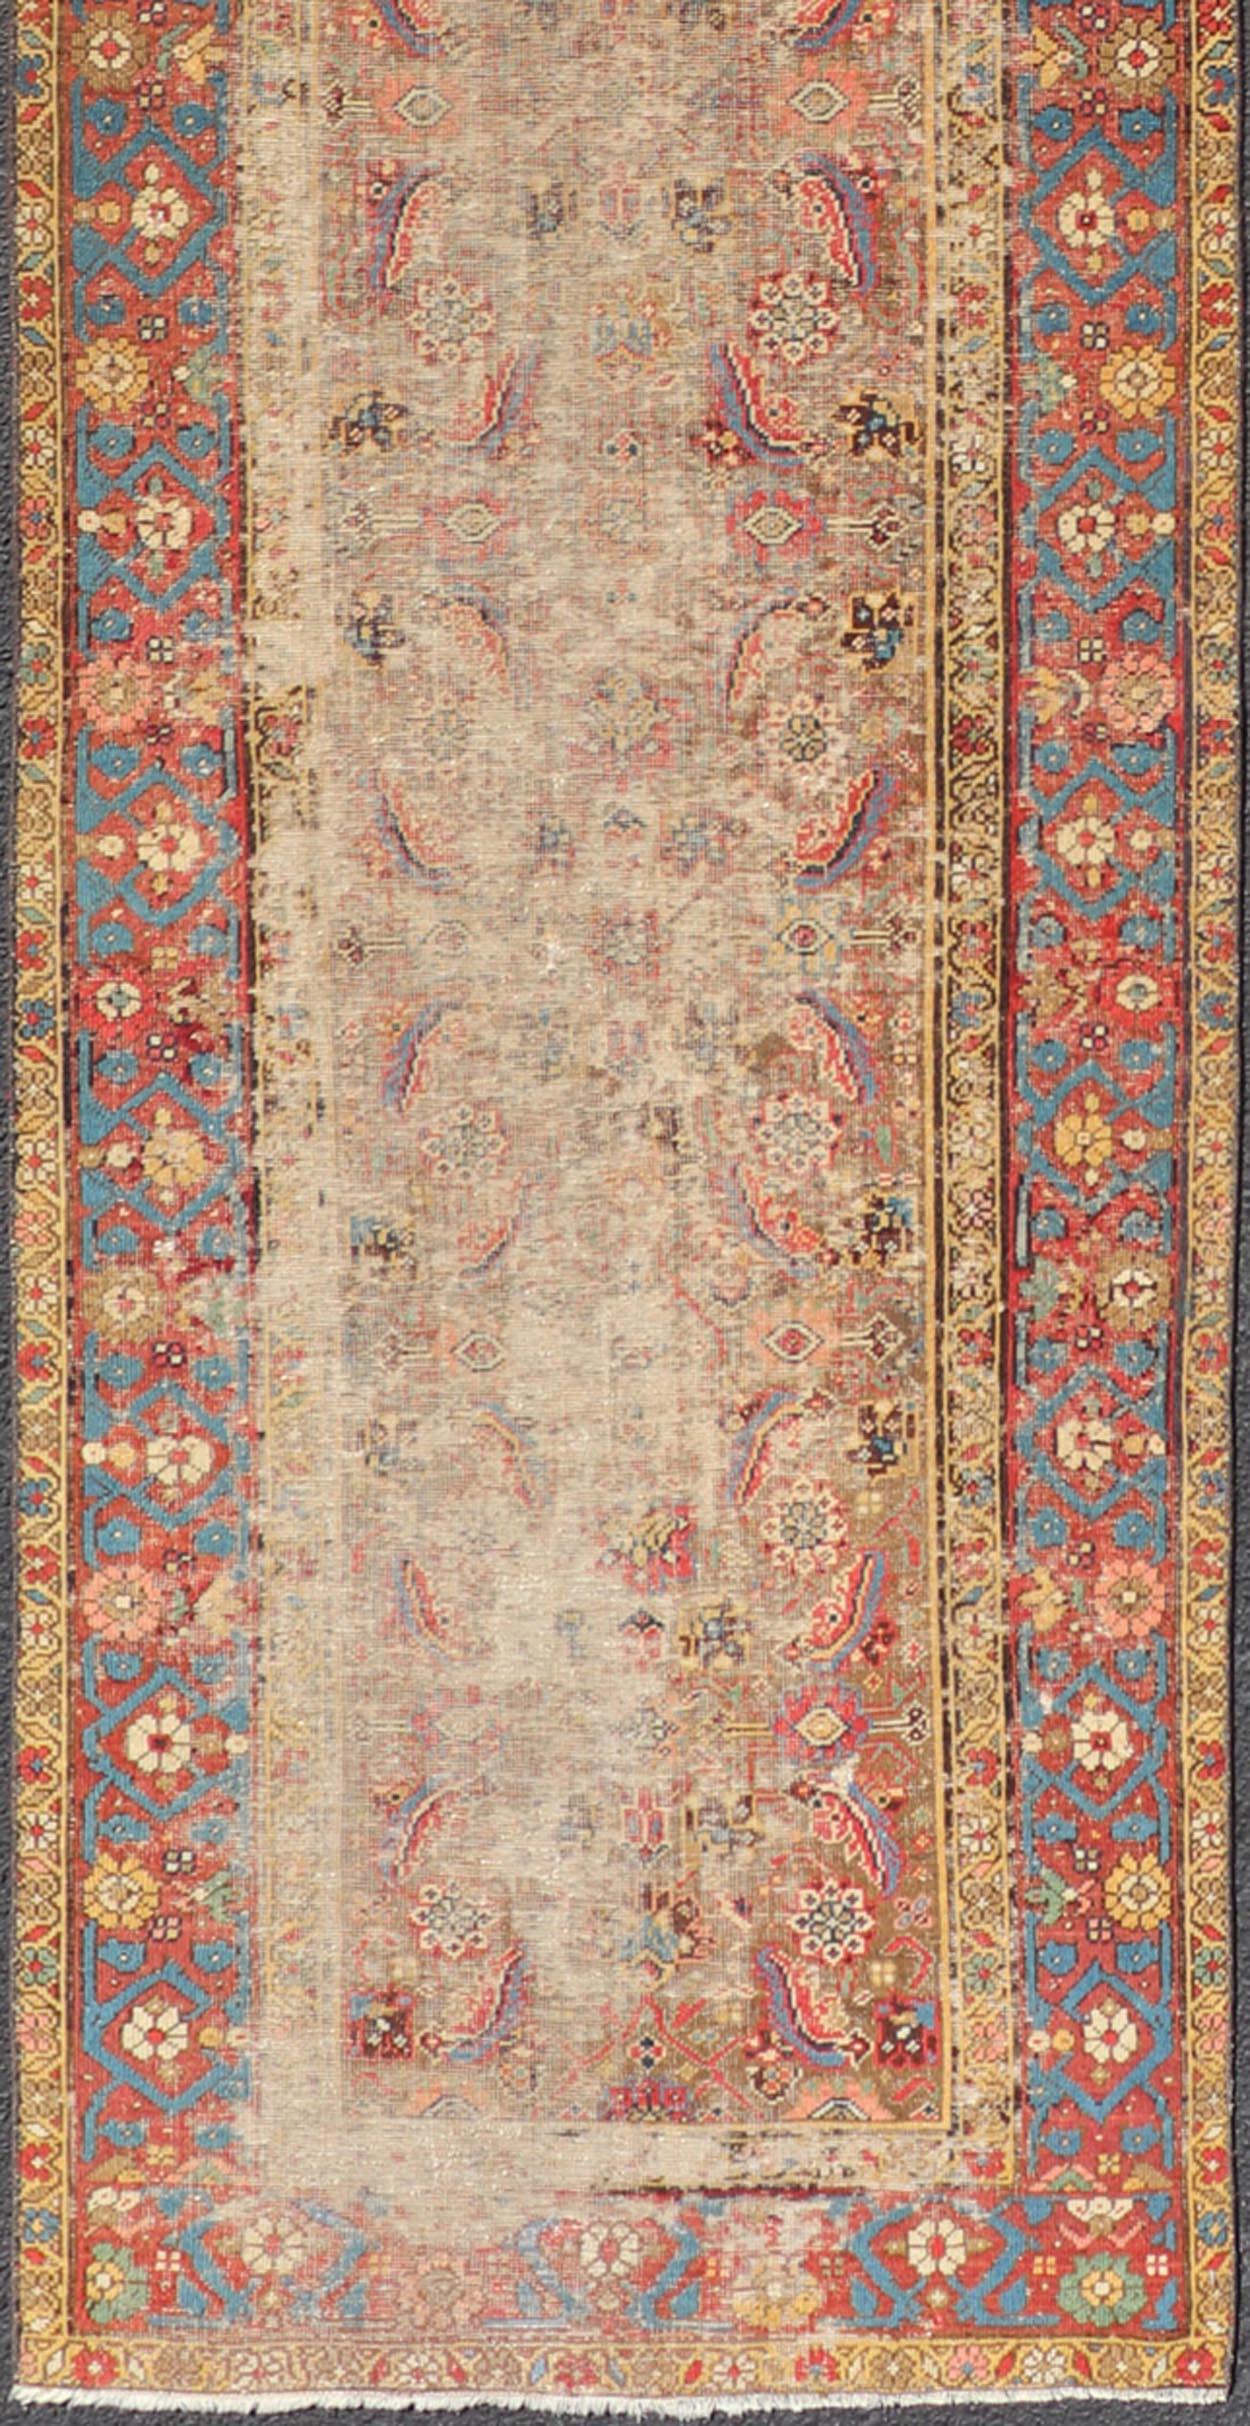 Late 19th Century Antique Persian Sultanabad Distressed Runner with Floral Design in Jewel Tones